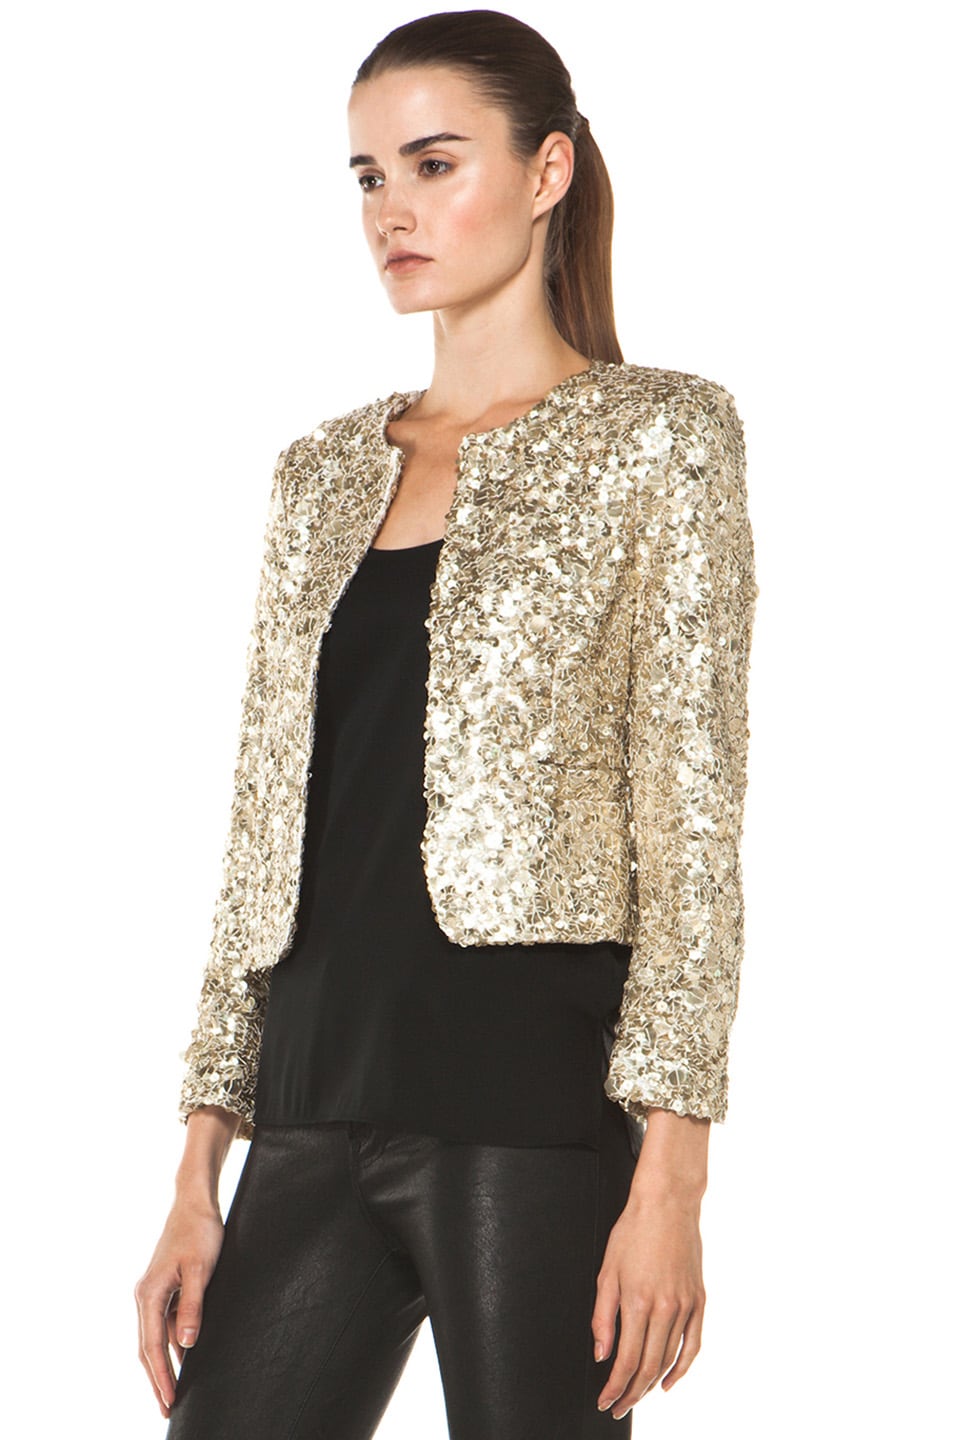 Alice + Olivia Brianna Open Front Sequin Jacket in Gold | FWRD